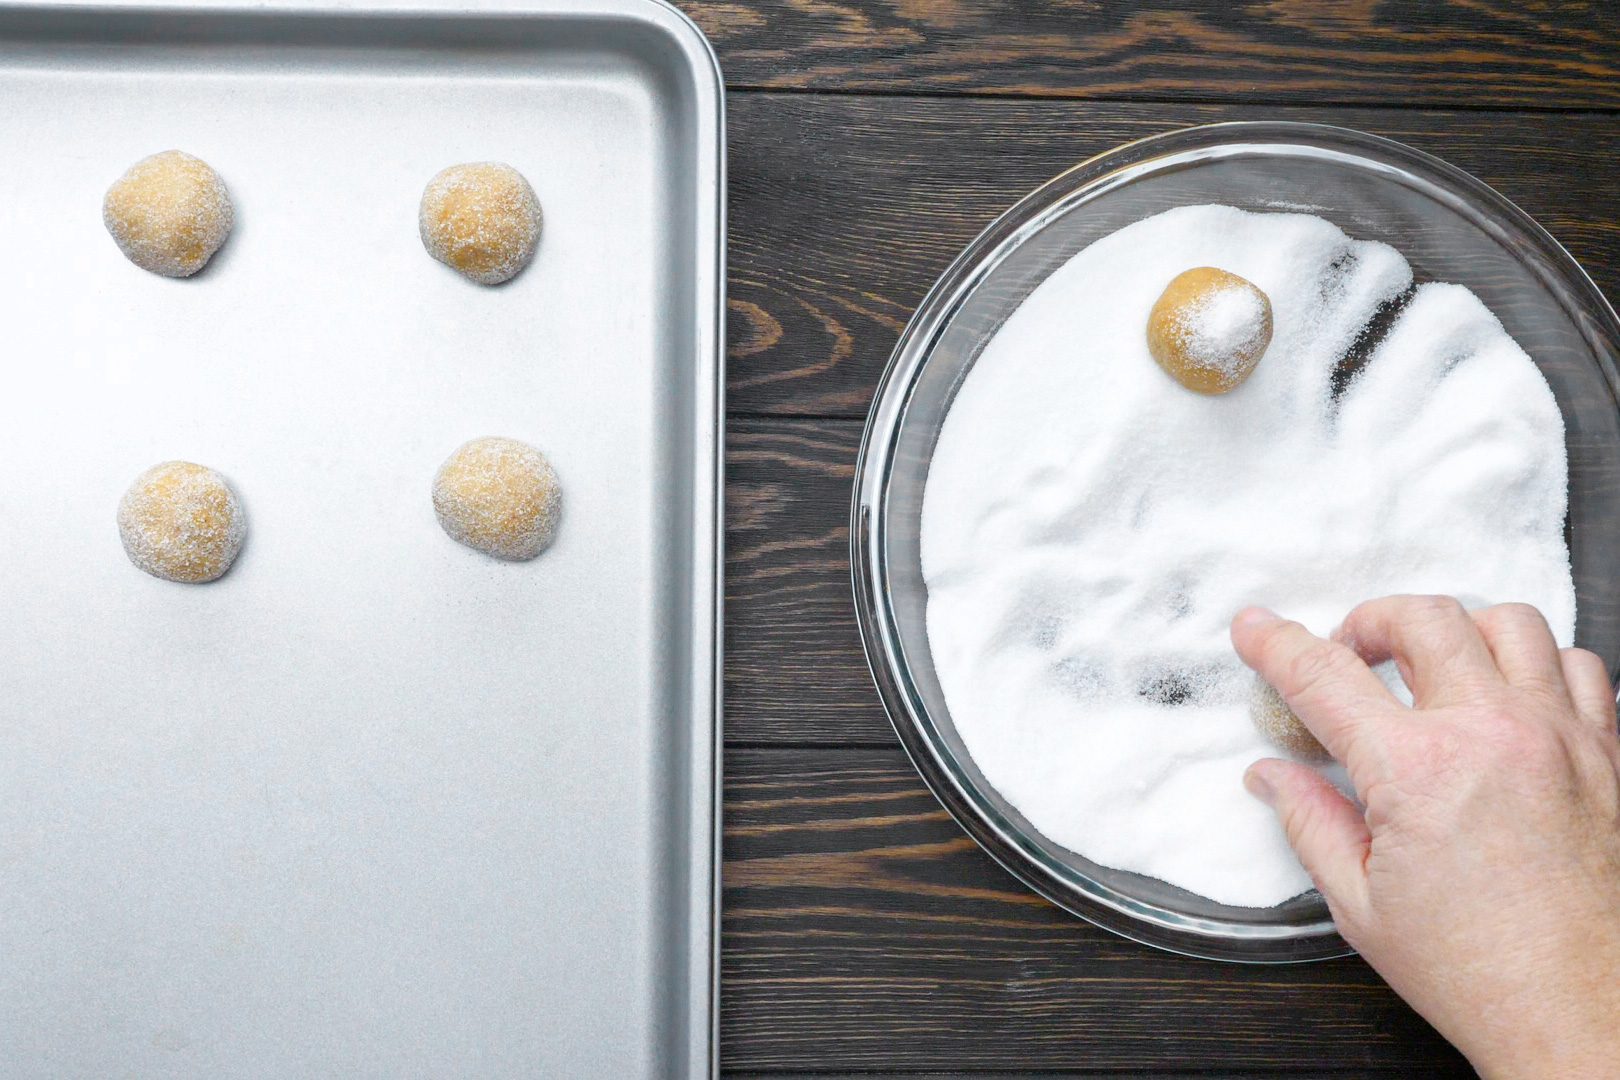 A person rolling the dough and placing prepared balls on a baking sheet